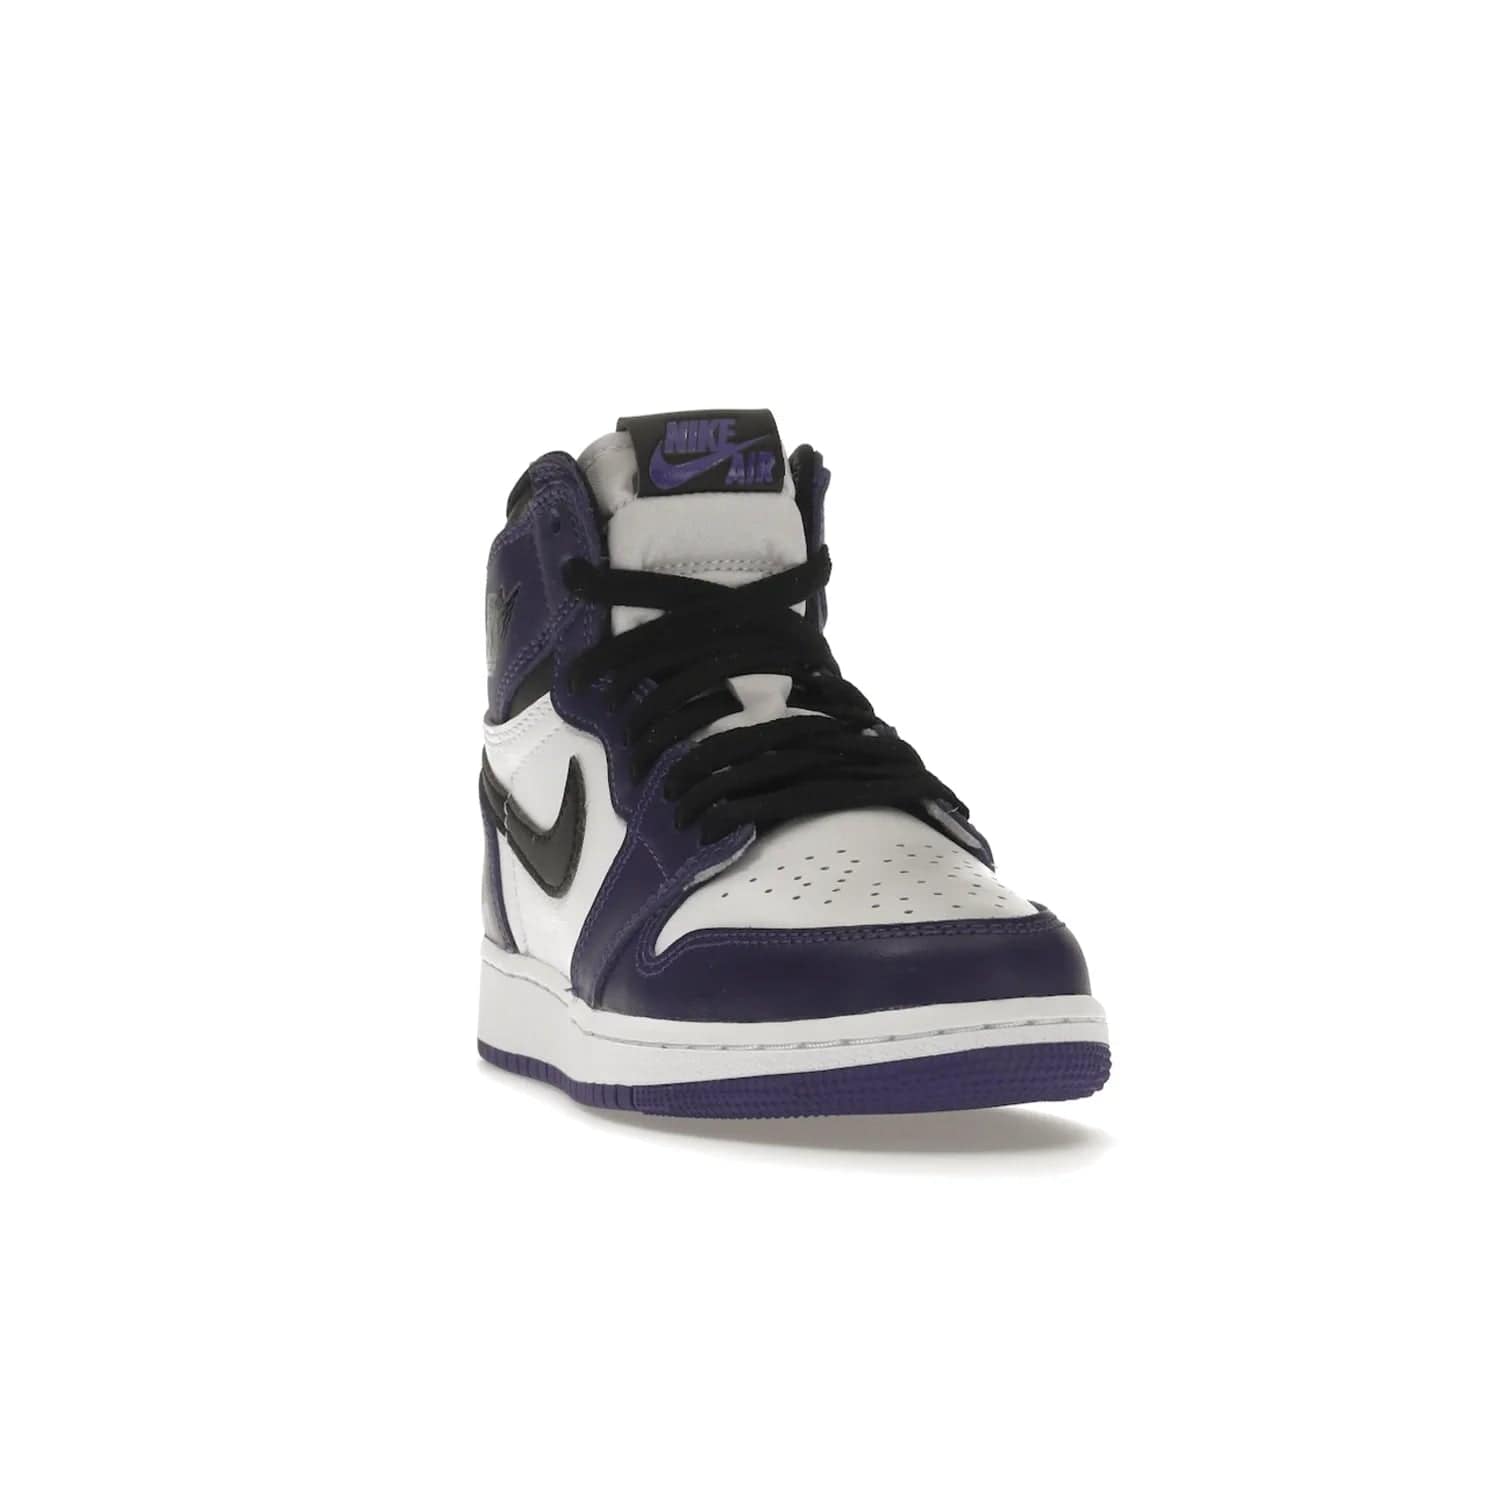 Jordan 1 Retro High Court Purple White (GS) - Image 8 - Only at www.BallersClubKickz.com - The Air Jordan 1 Retro High Court Purple is here and young sneaker heads can show off classic style. Features a white tumbled leather upper, black swoosh, purple overlays, black collar with purple overlay, white tongue, black patch with purple Nike Air logo and swoosh, white midsole, and purple rubber outsole with circular pattern.